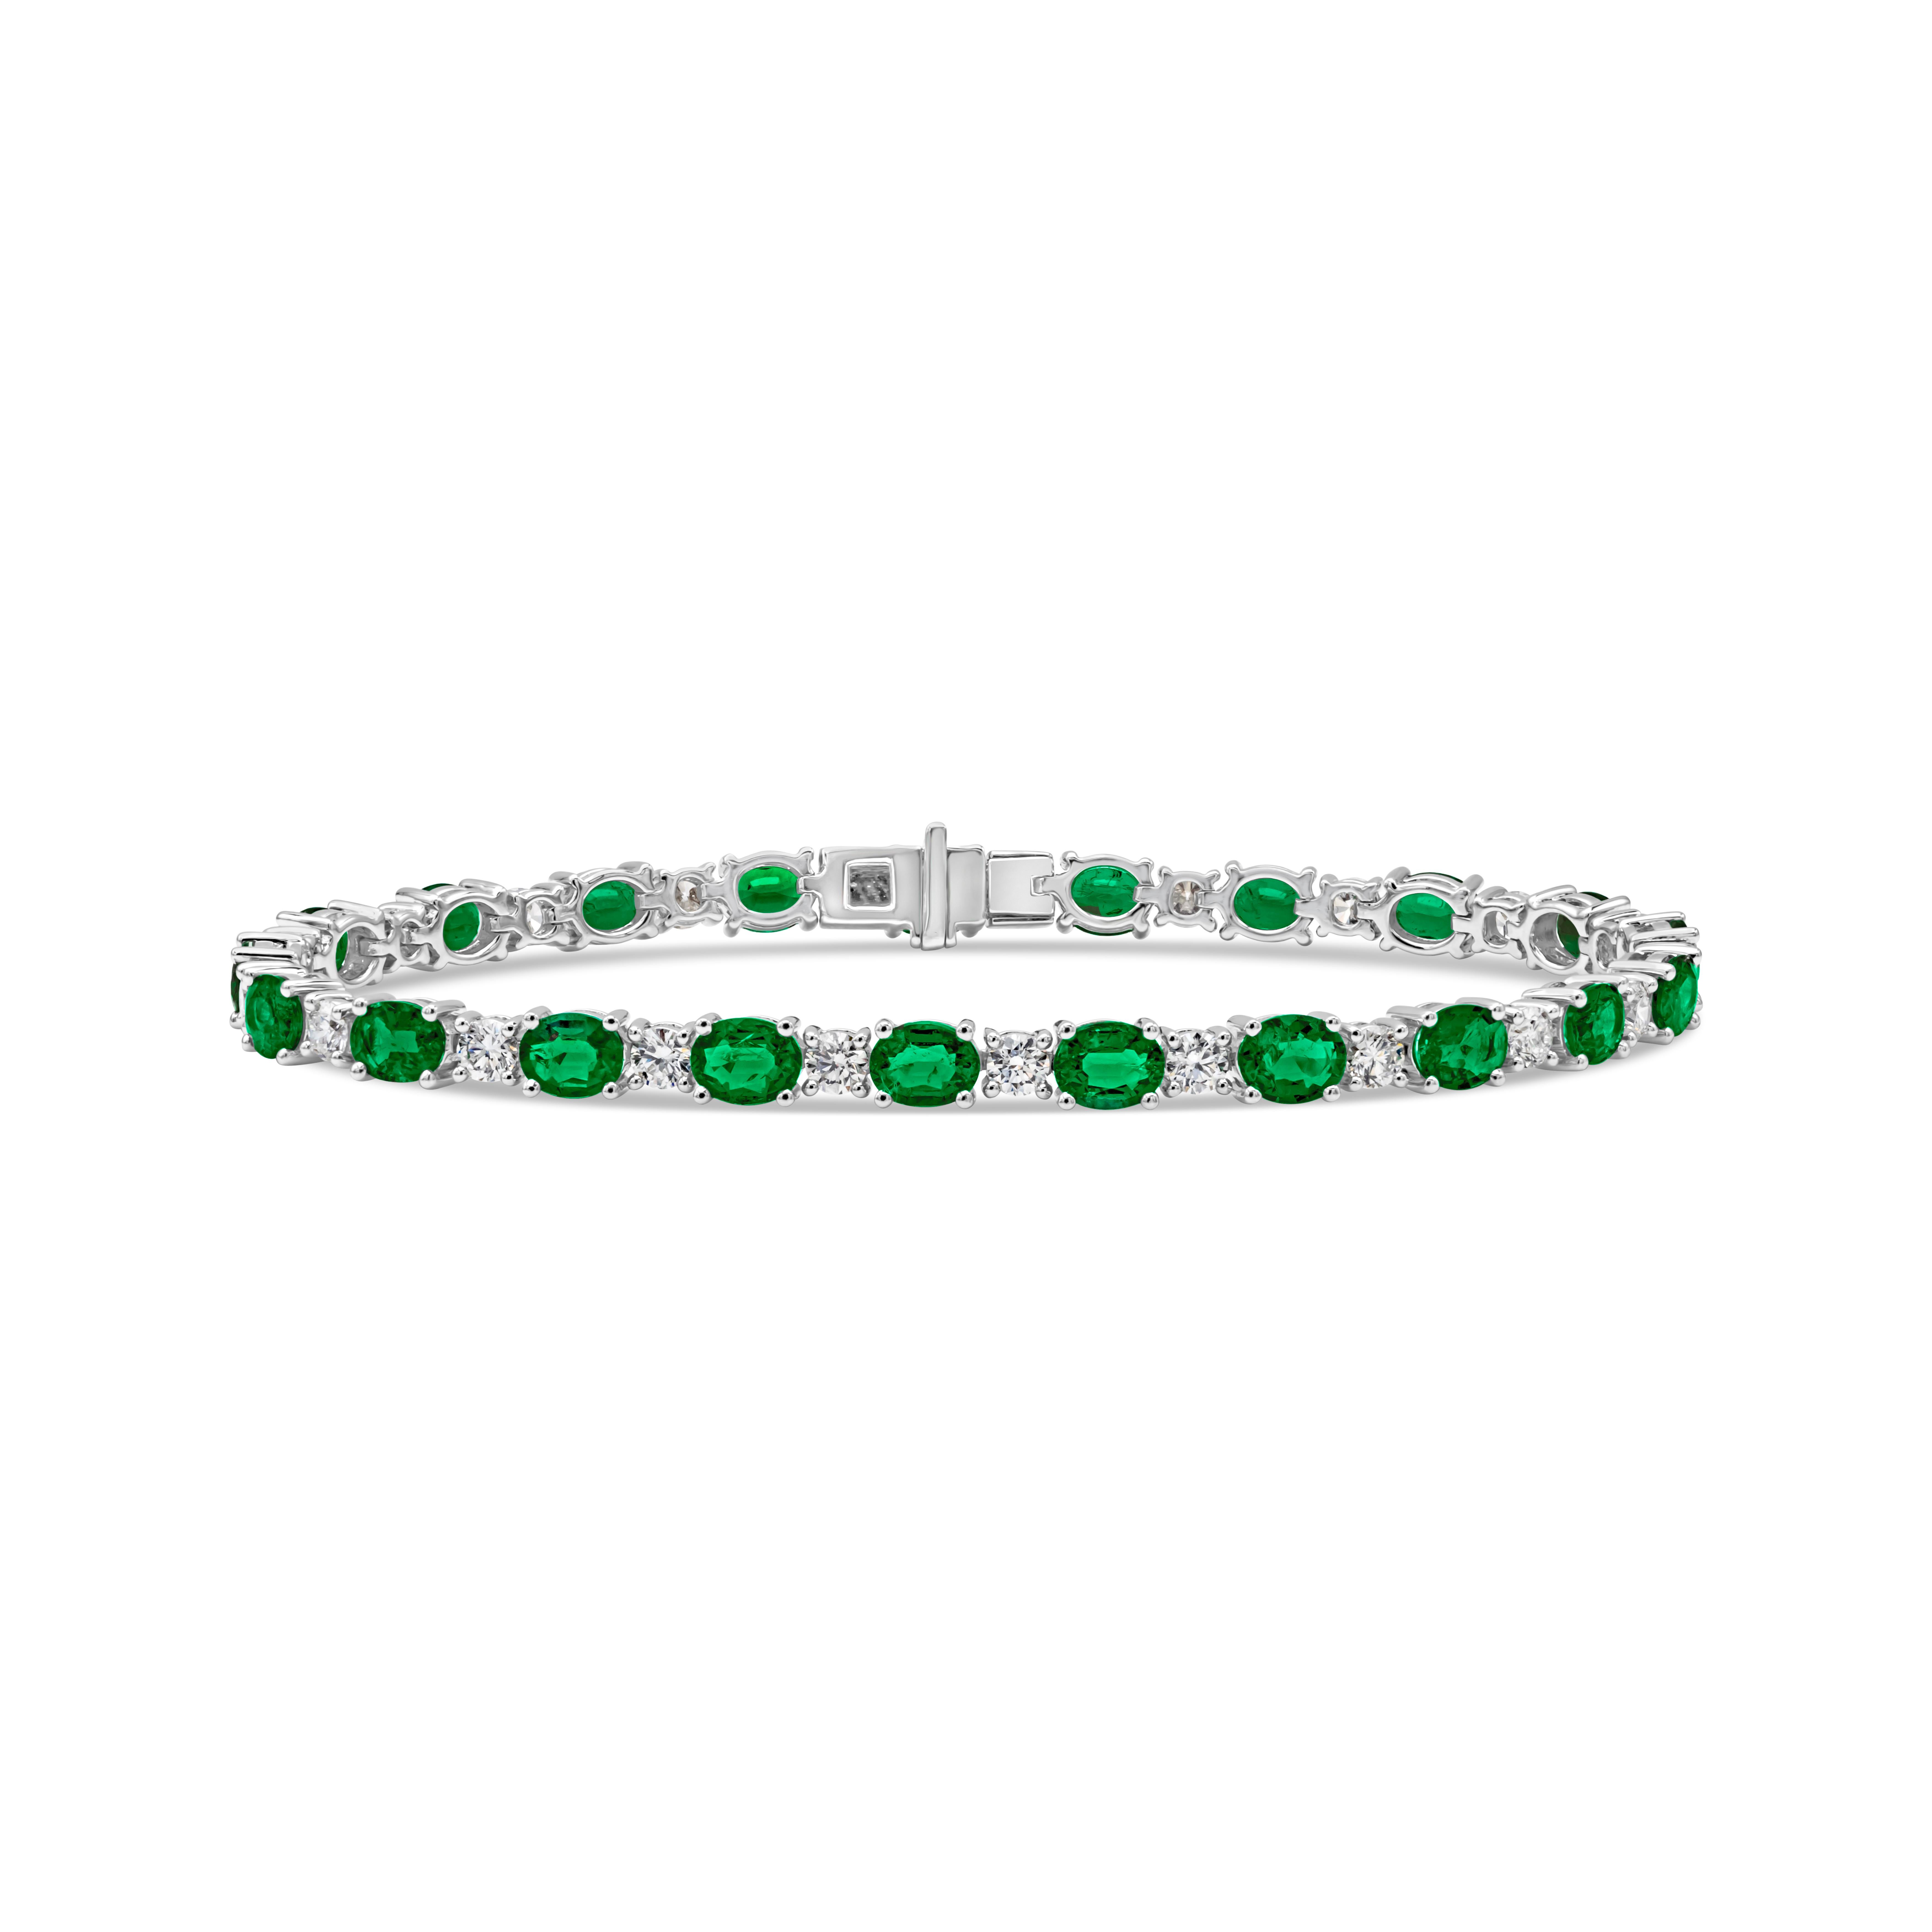 An exquisite and elegant tennis bracelet showcasing a color-rich oval cut green emerald weighing 5.33 carats total, set in a classic four prong setting. Evenly spaced by brilliant round cut diamonds weighing 1.94 carats total, G color and VS2 in